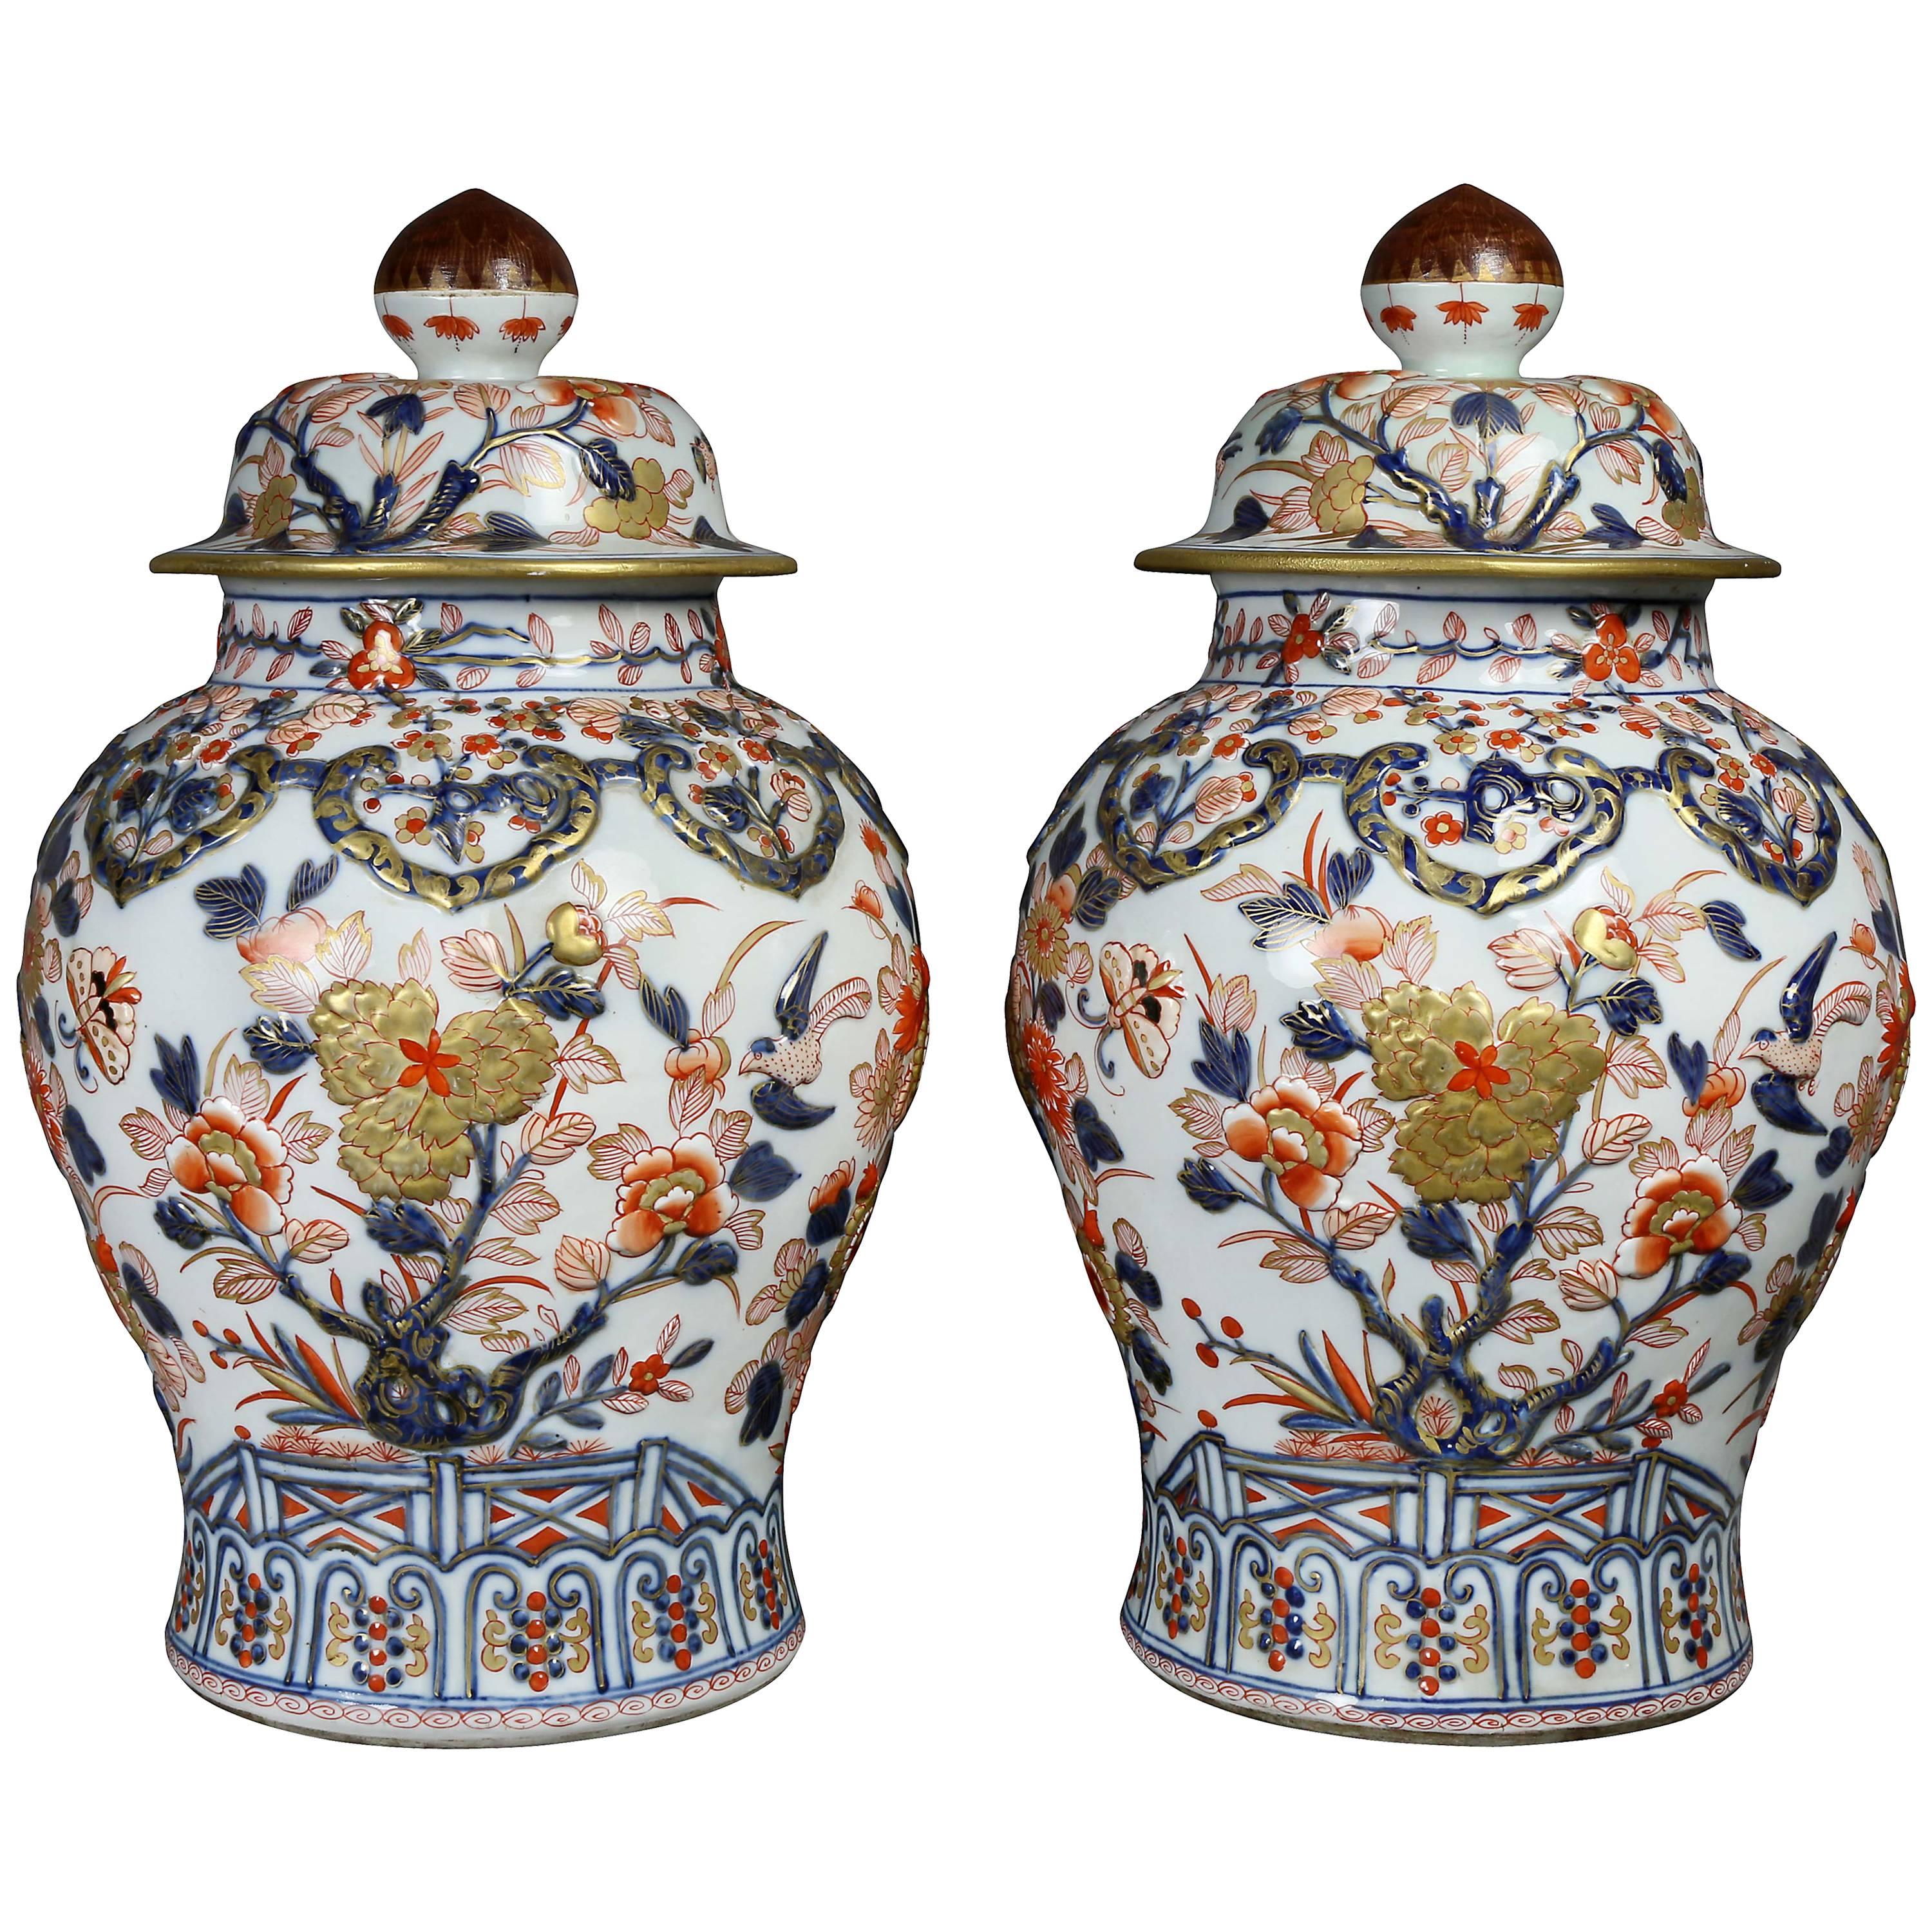 Pair of Samson Export Style Covered Temple Jars